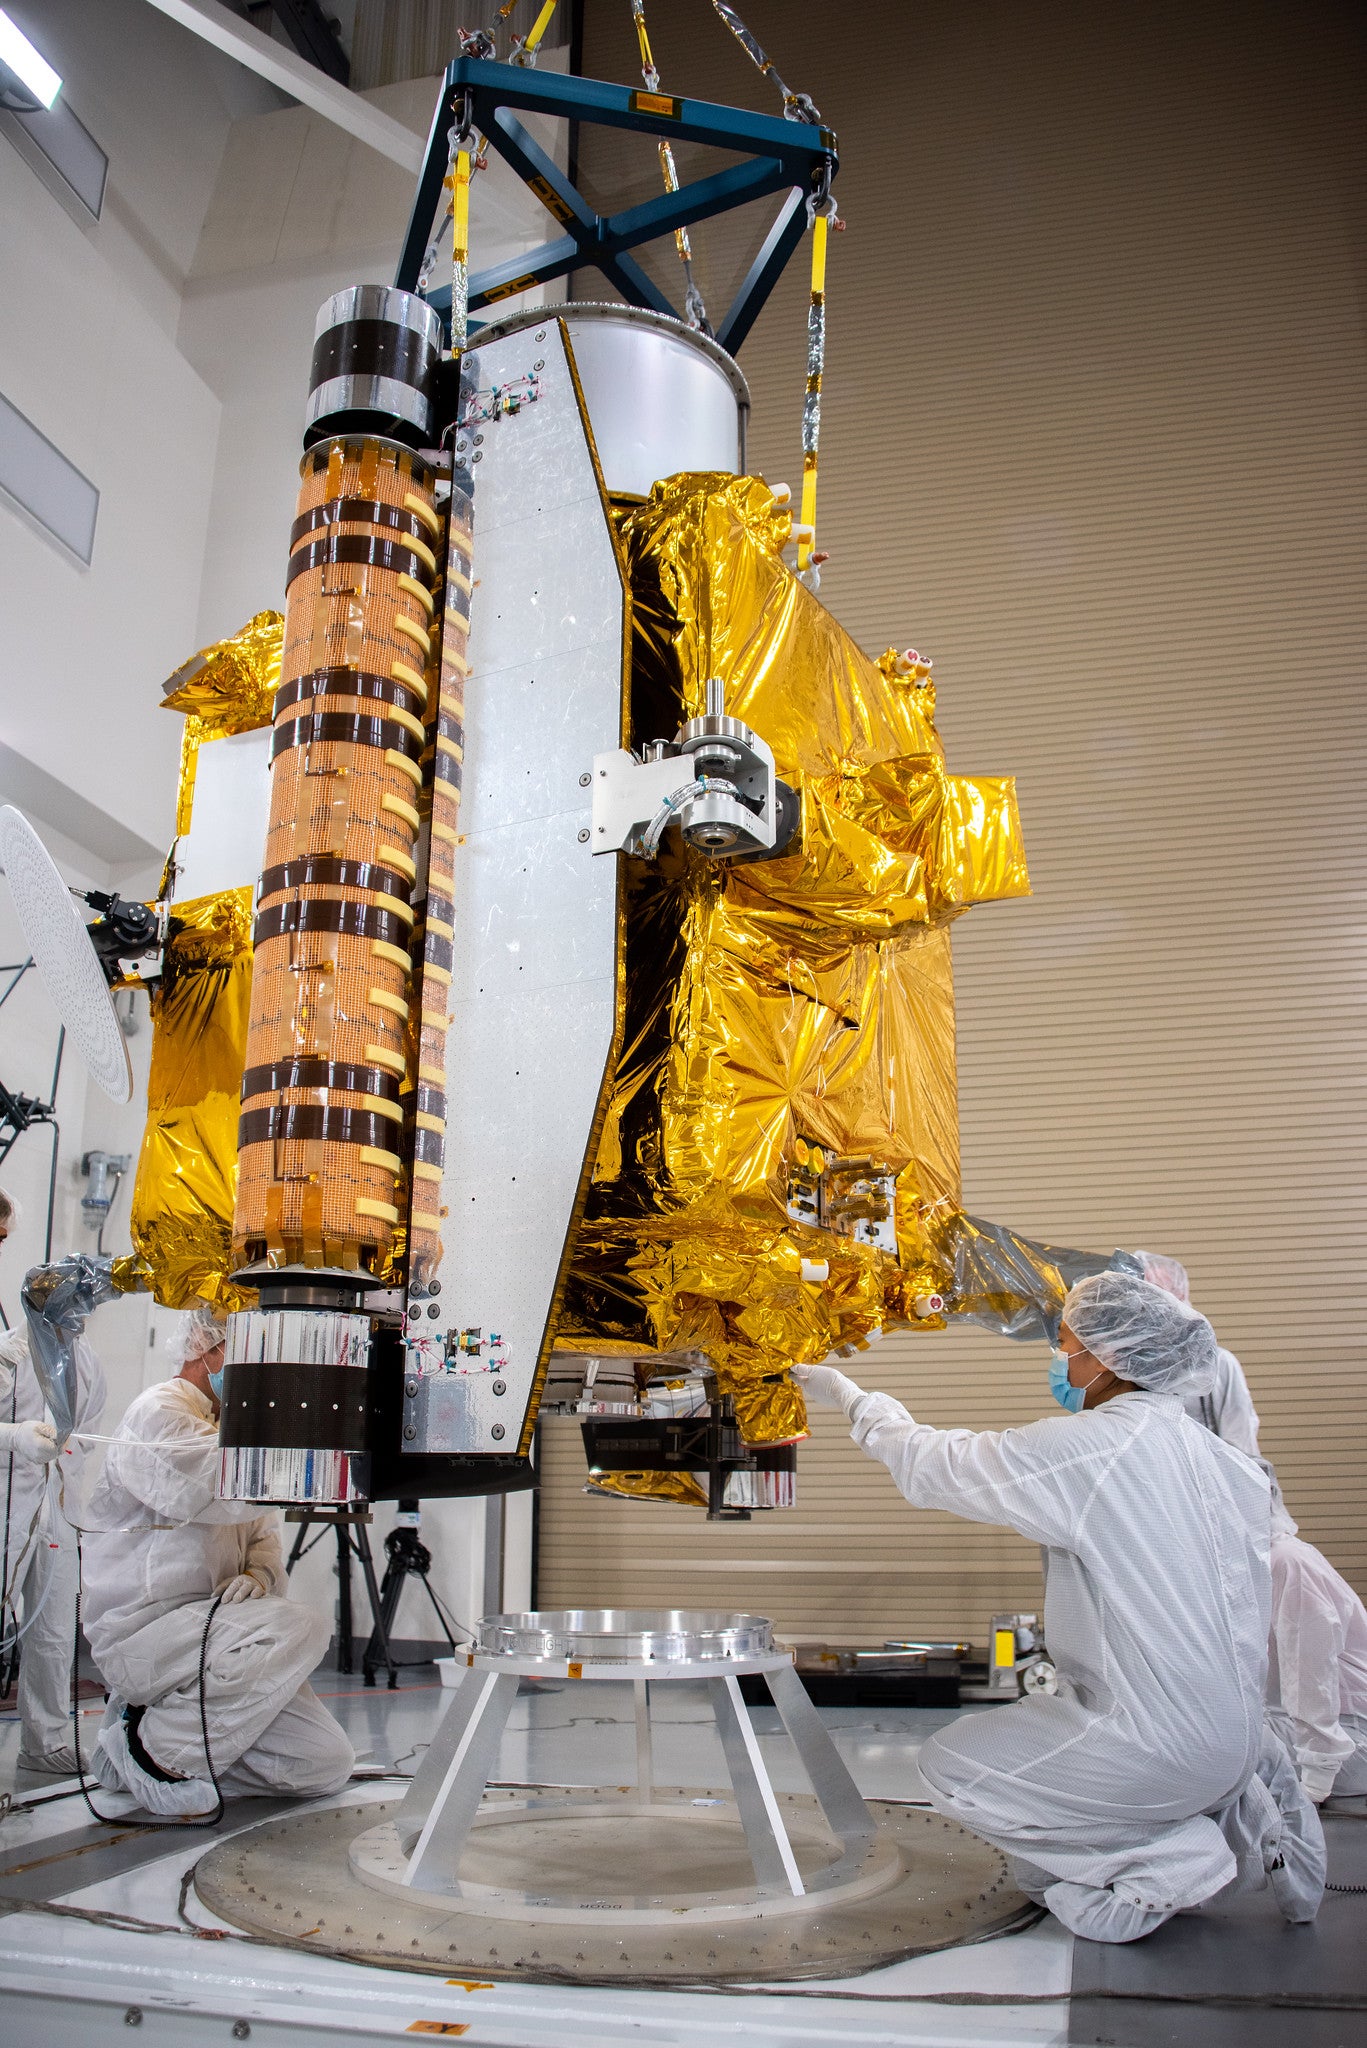 Technicians work on the DART spacecraft at Vandenberg Space Force Base in California on Oct. 4, 2021. (Photo: USSF 30th Space Wing/Aaron Taubman)